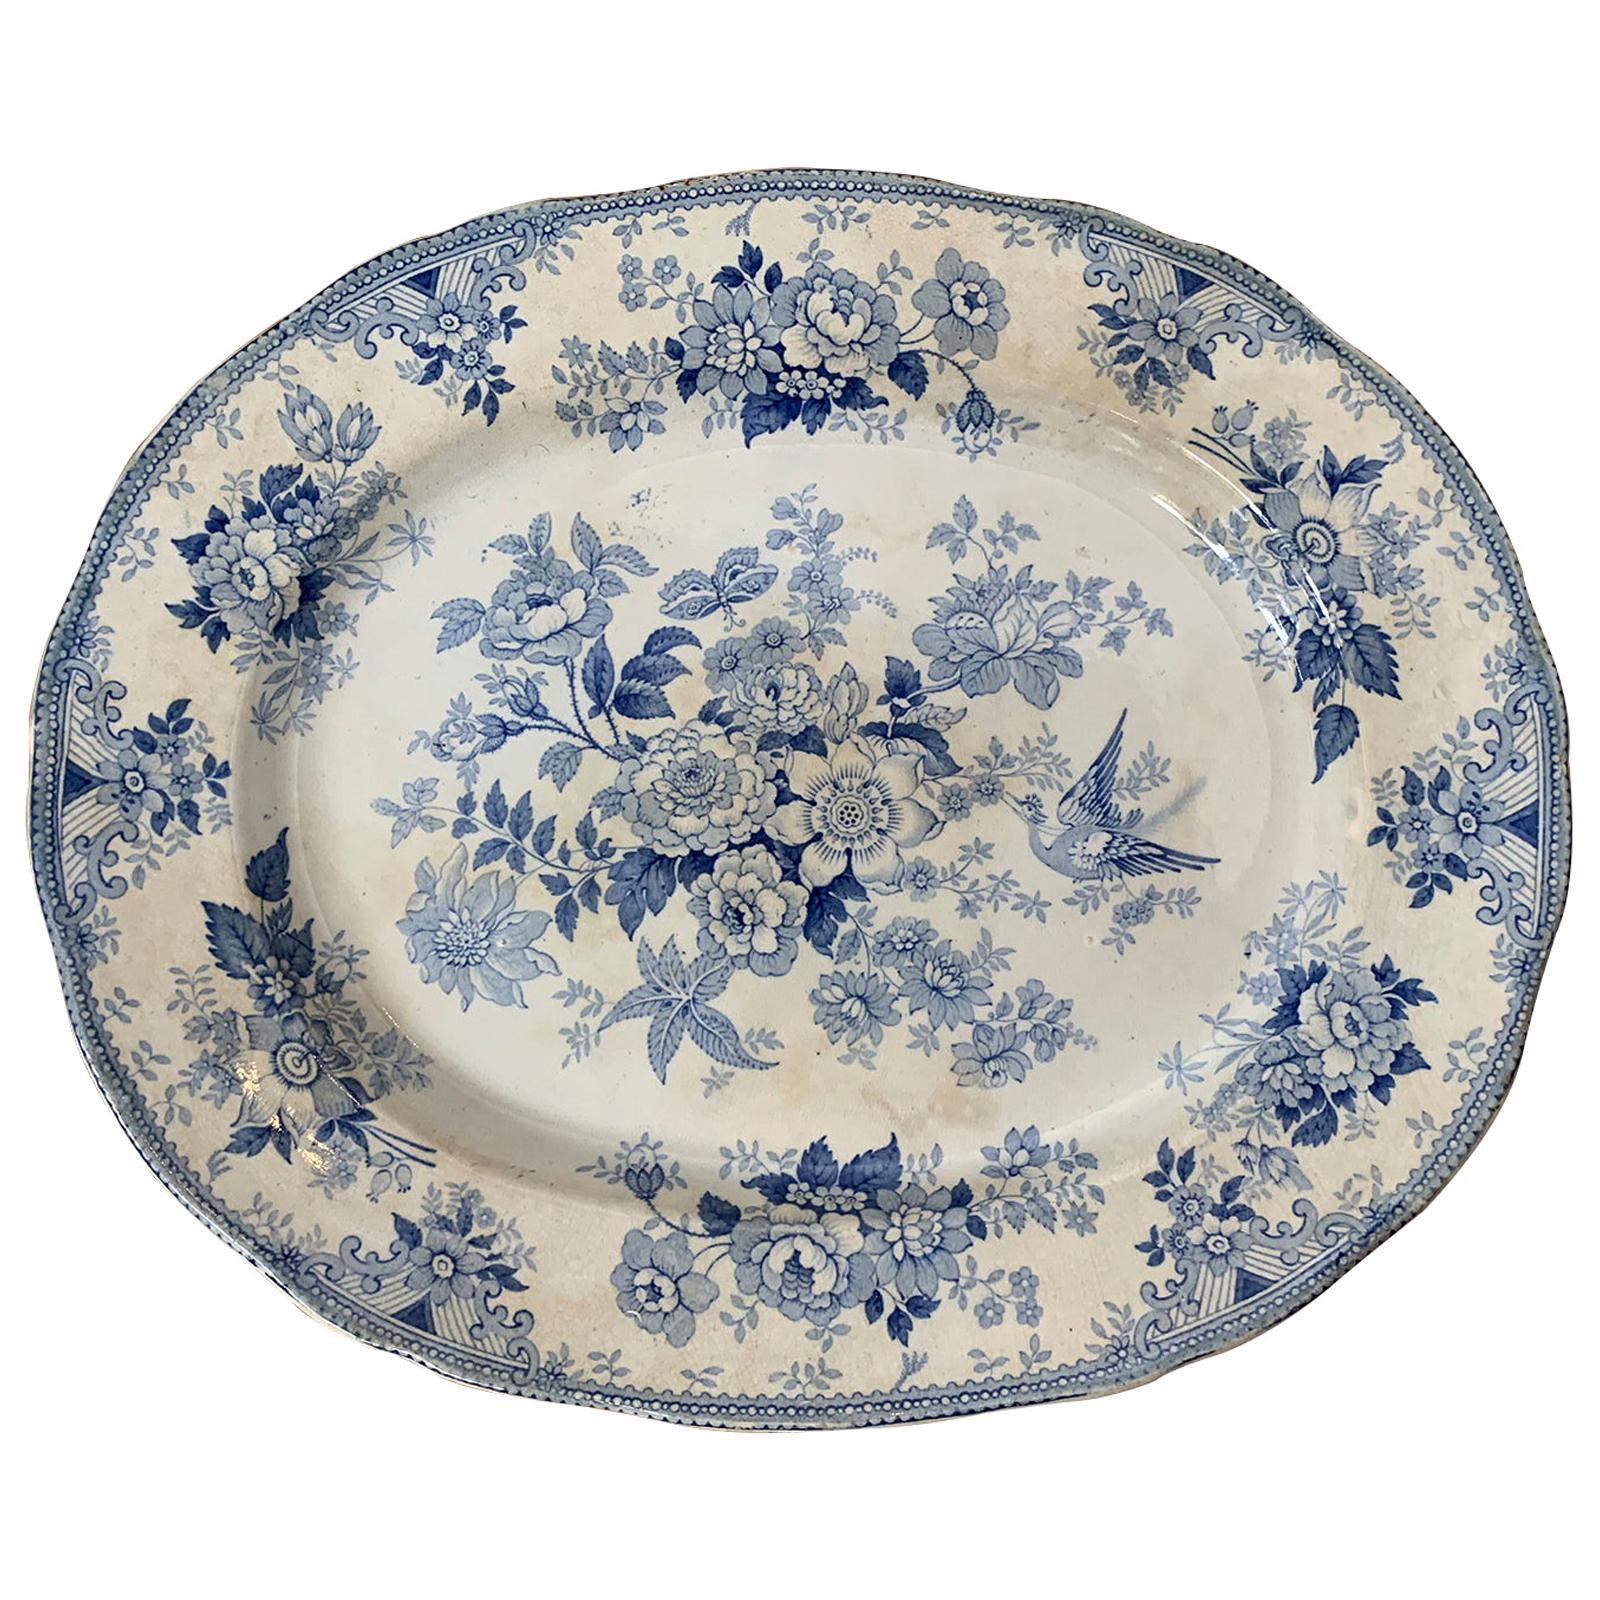 19th Century English Transferware Charger in Asiatic Pheasants Pattern Signed JF For Sale